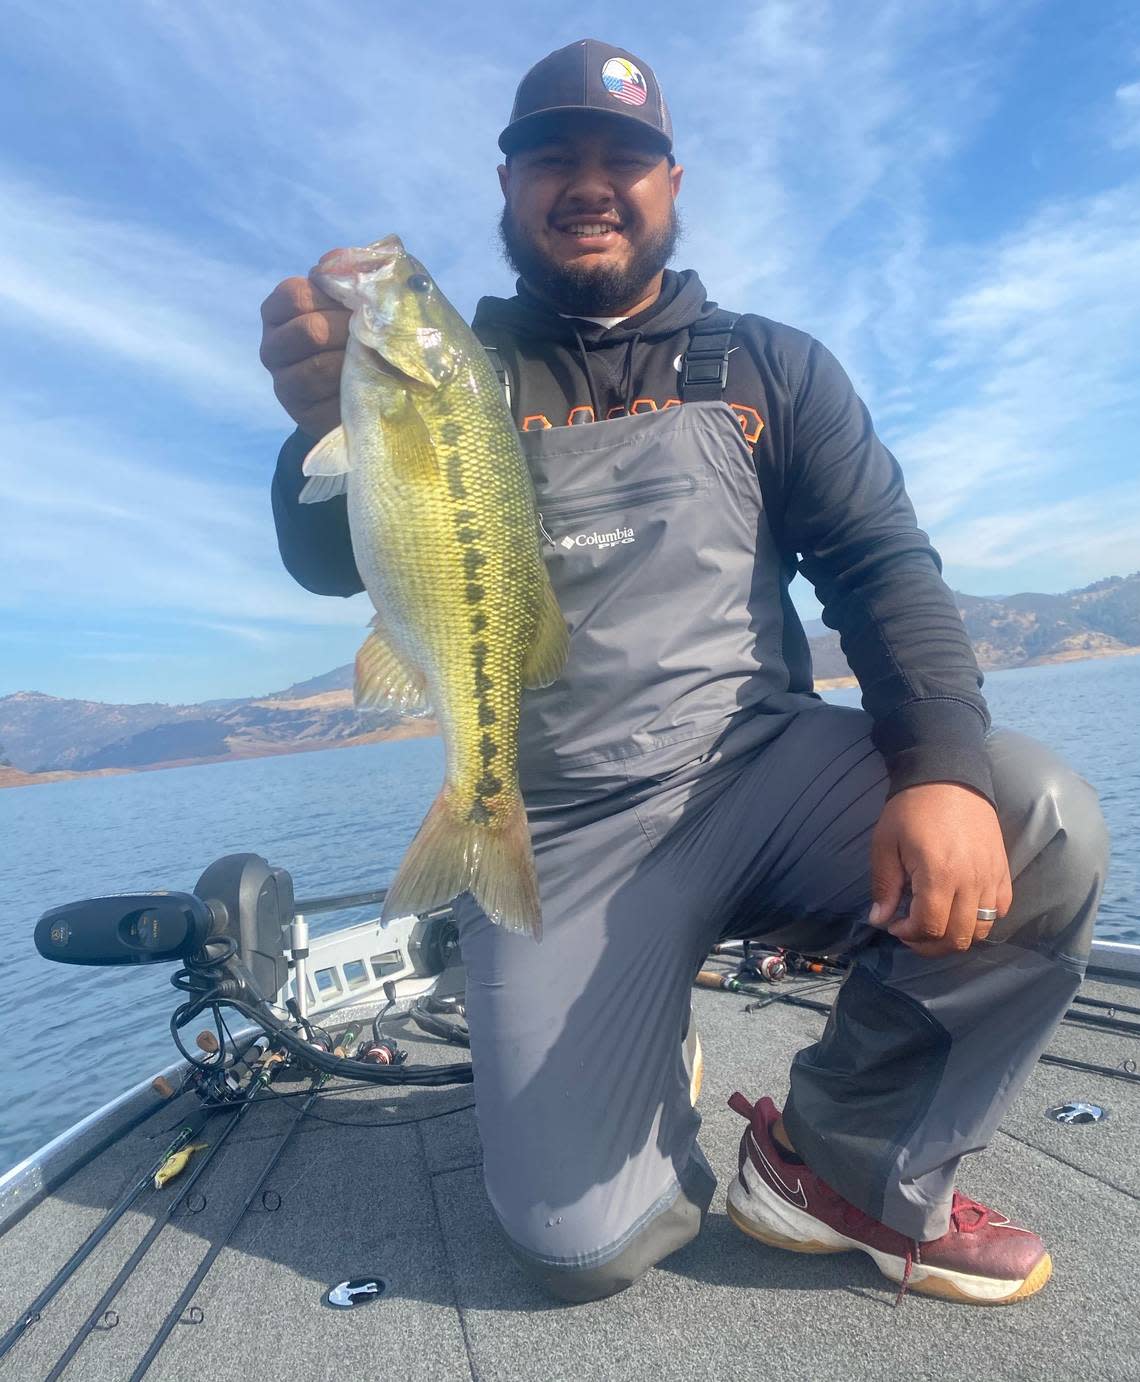 Phillip Aramburu shows off his catch made Tuesday, Dec. 8, 2020 at Lake Don Pedro trolling a River2Sea S-Waver Lite in trout color over island tops.